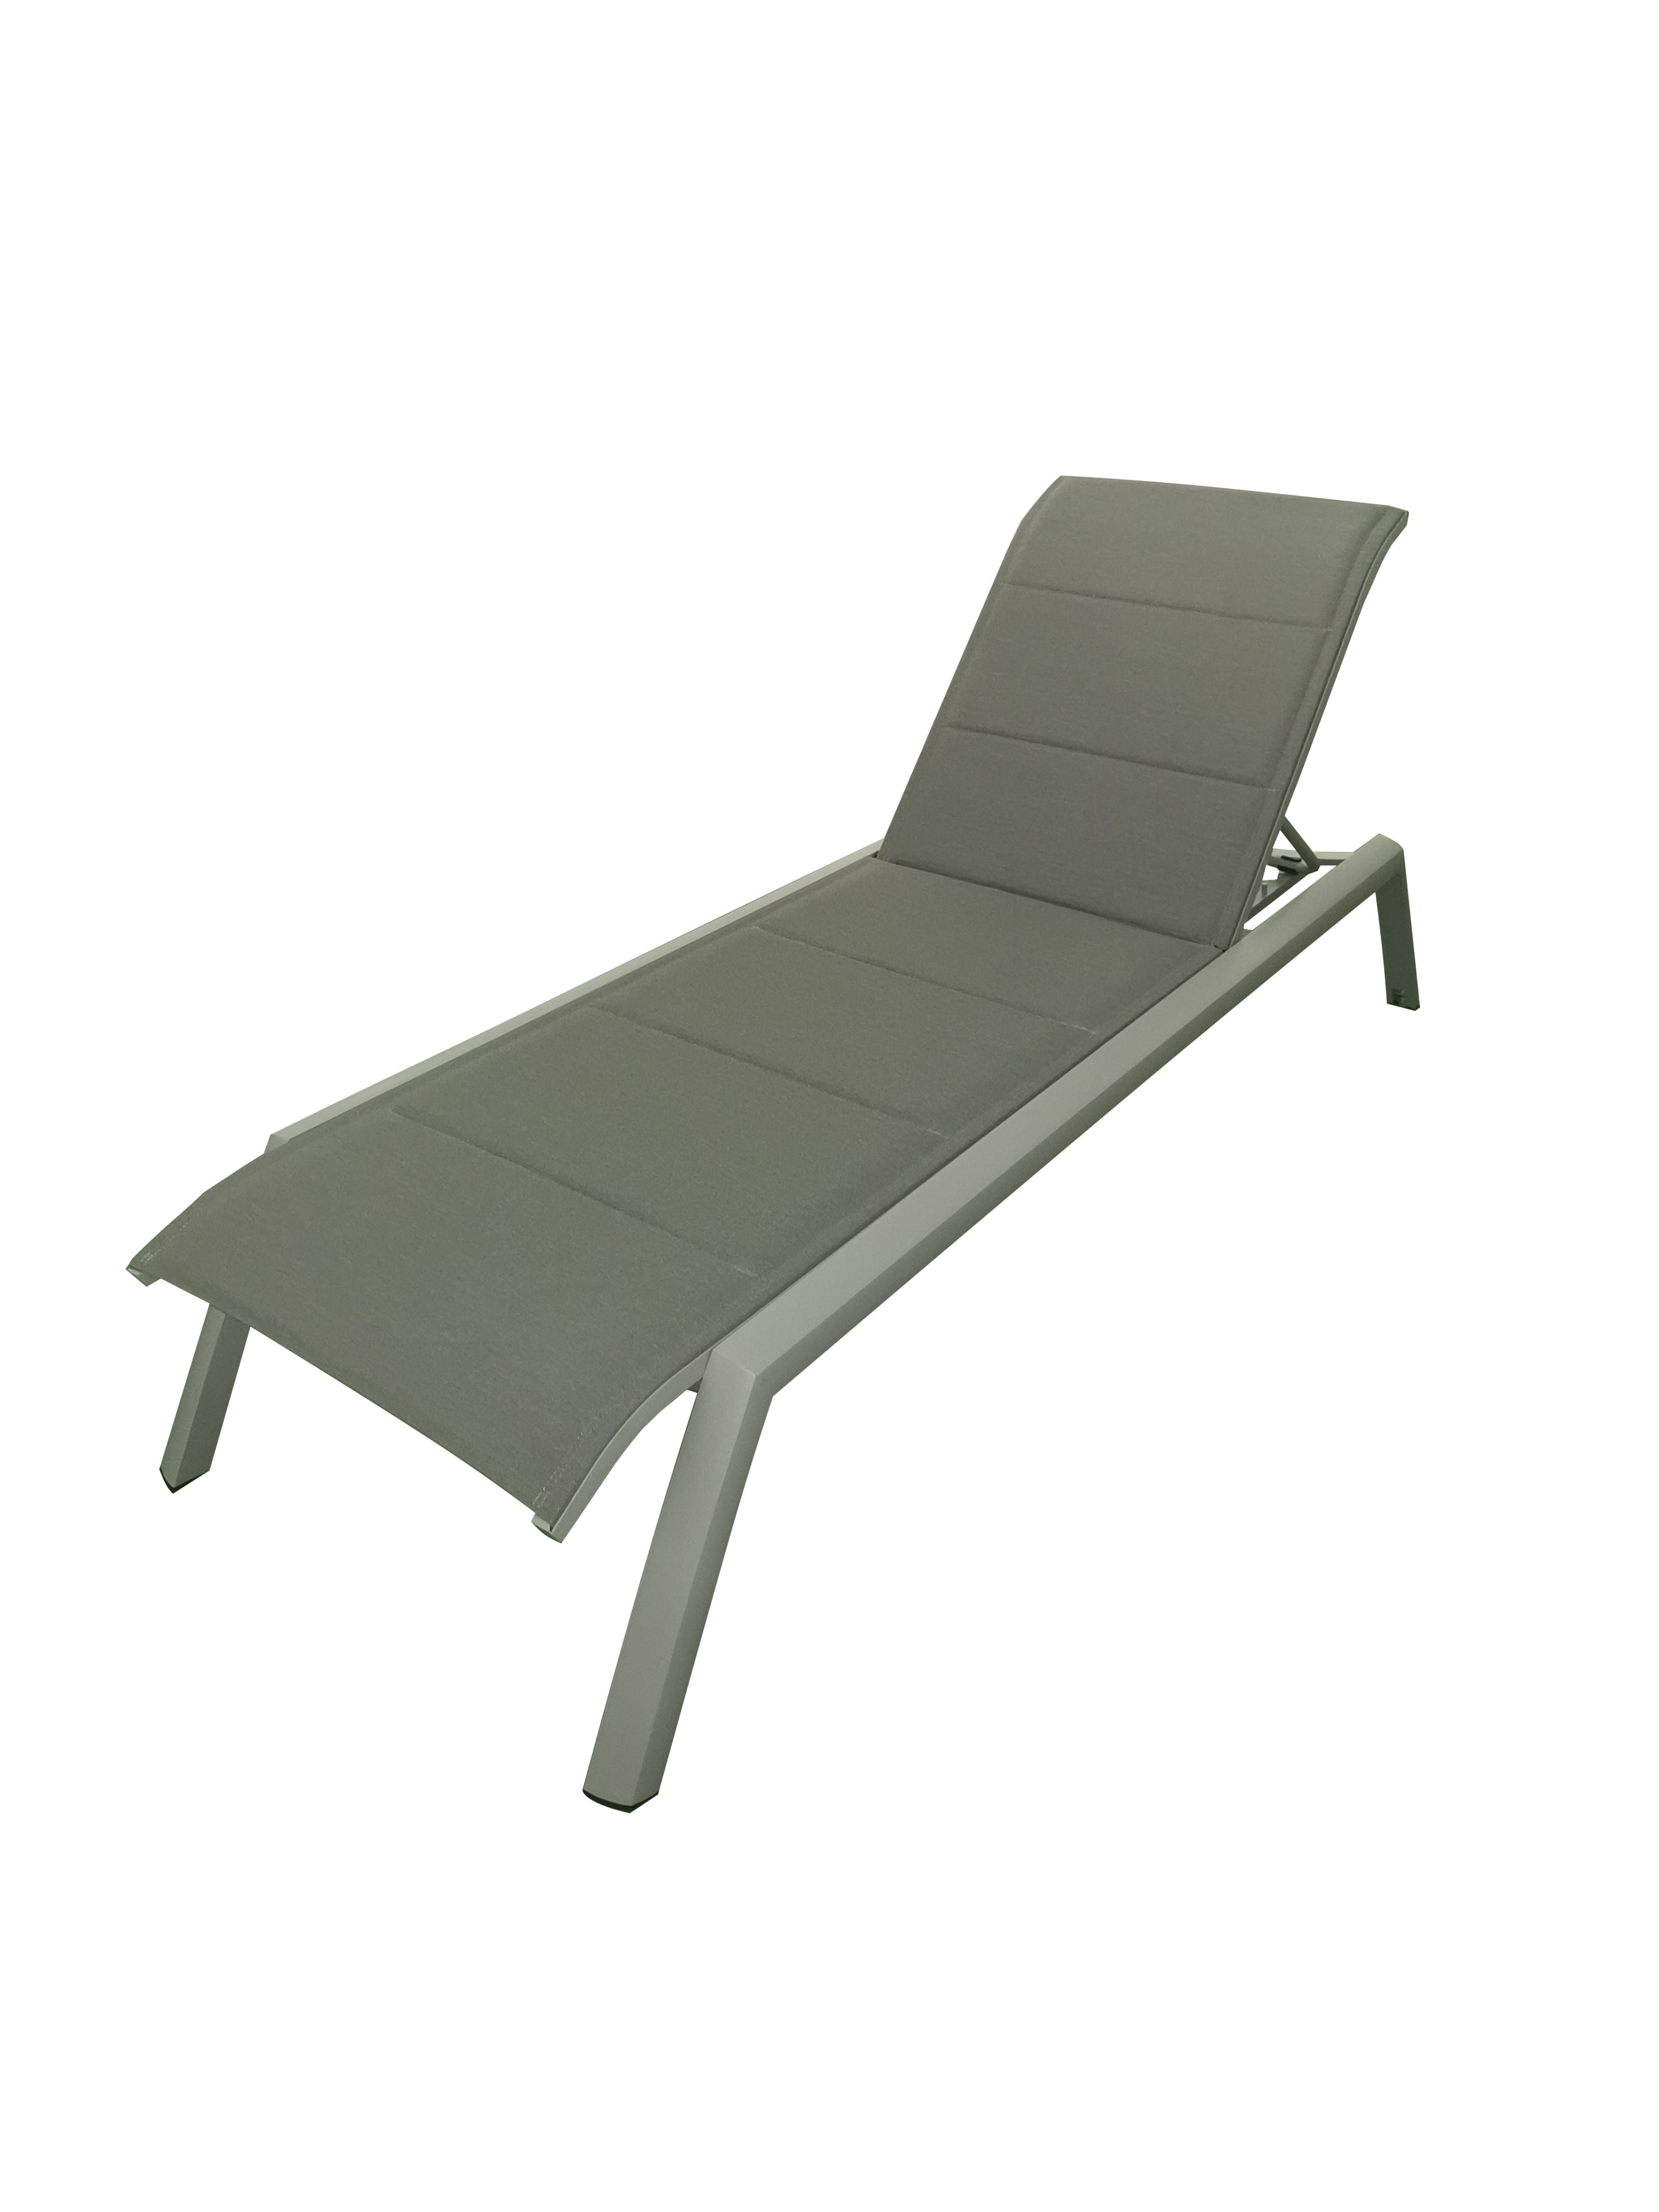 MOSS MOSS-0445GPM - Akumal Collection, Light Grey matte aluminum reclining & stackable lounger chair with convenient small back wheels & with grey mix quick dry padded textilene 28 1/2" x 80" x H 14"